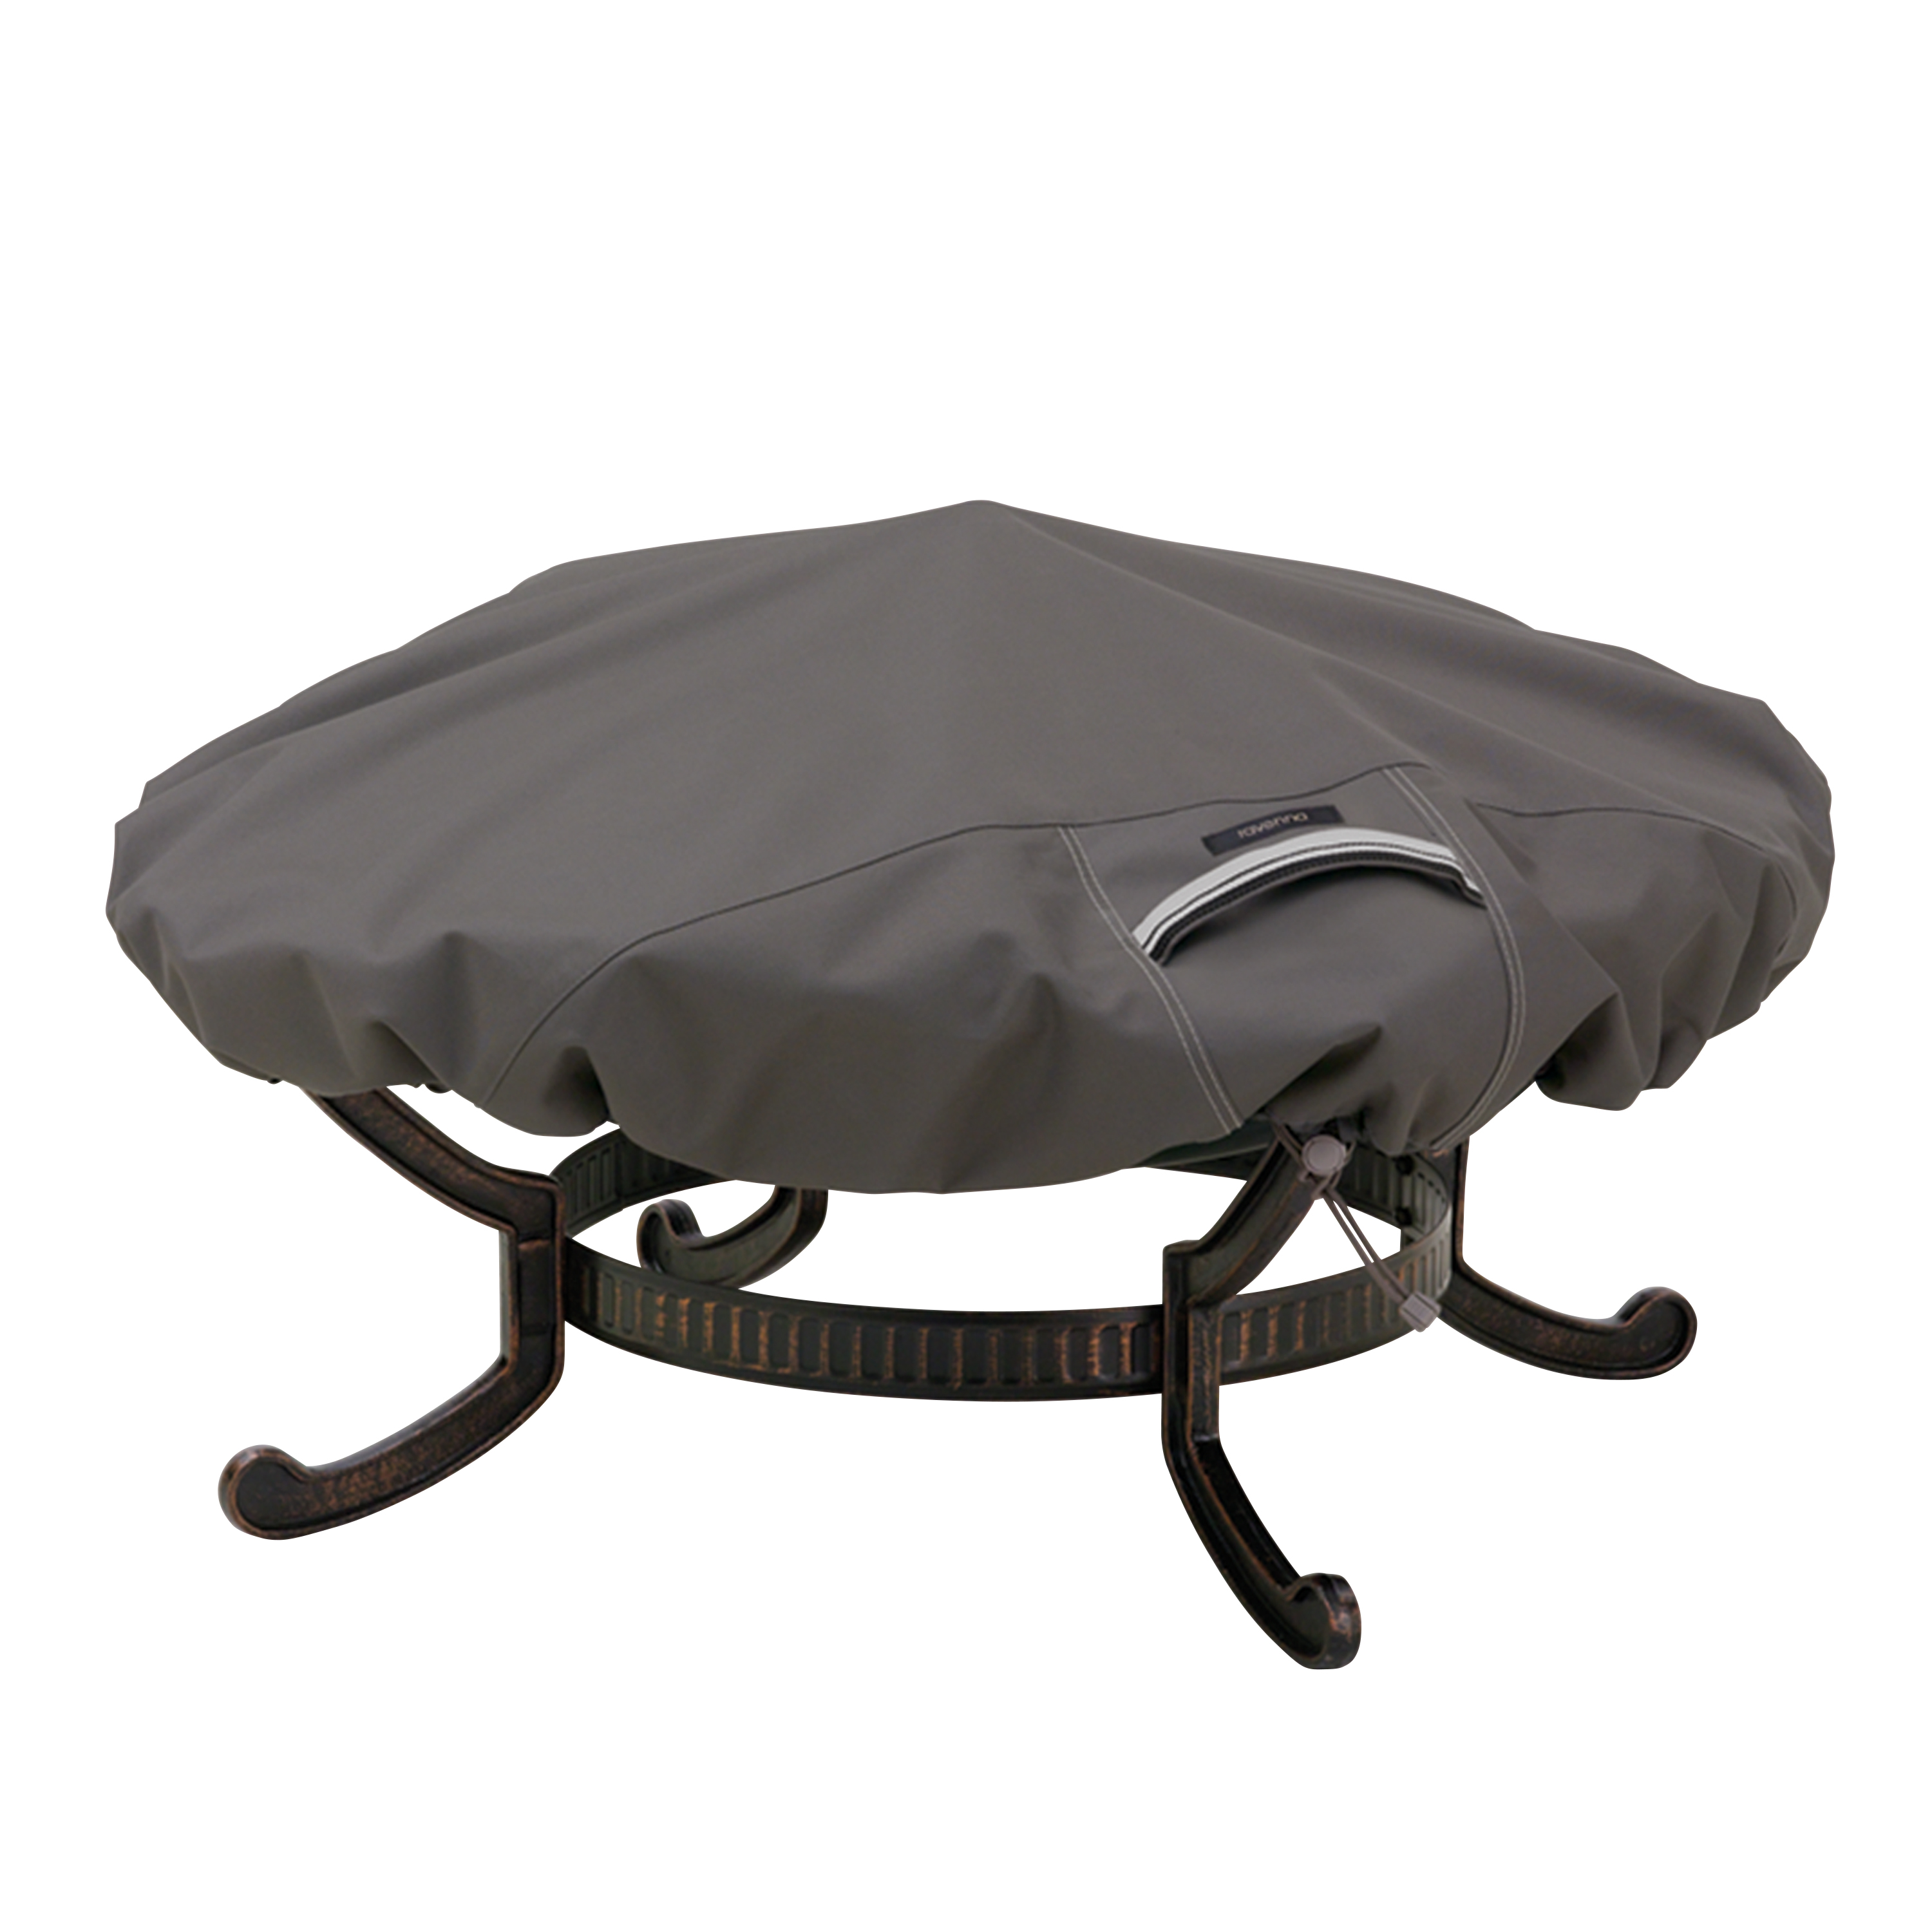 Classic Accessories Ravenna Water-Resistant 60 Inch Round Fire Pit Cover - image 1 of 19